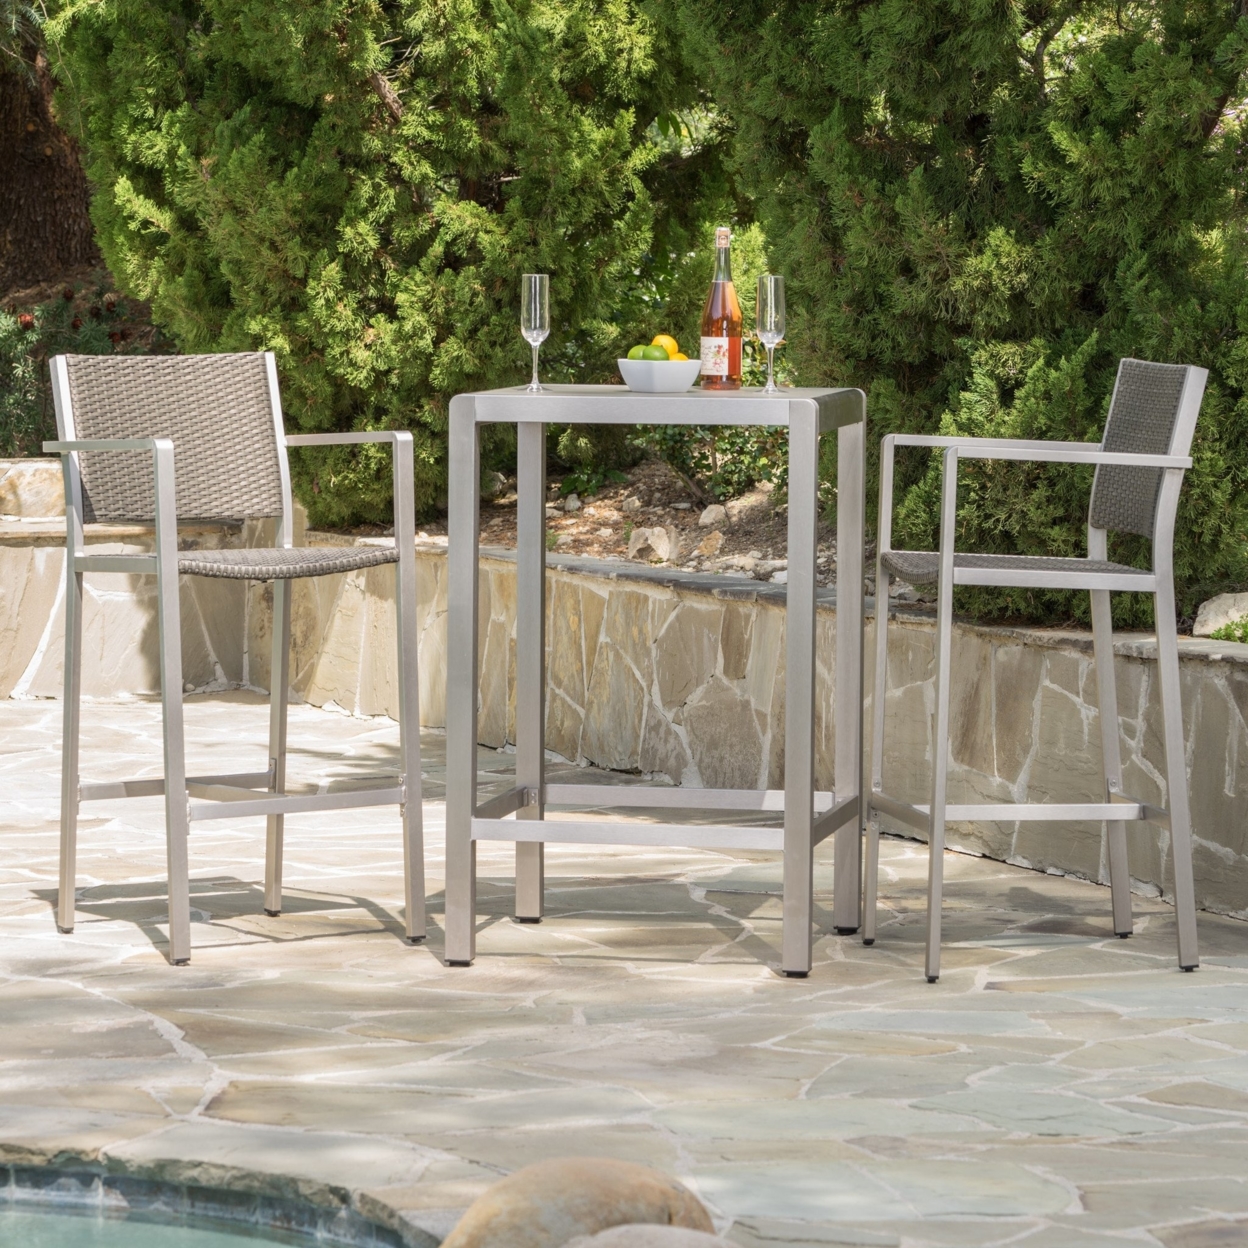 Capral Outdoor 3 Piece Grey Wicker Bar Set With Glass Table Top